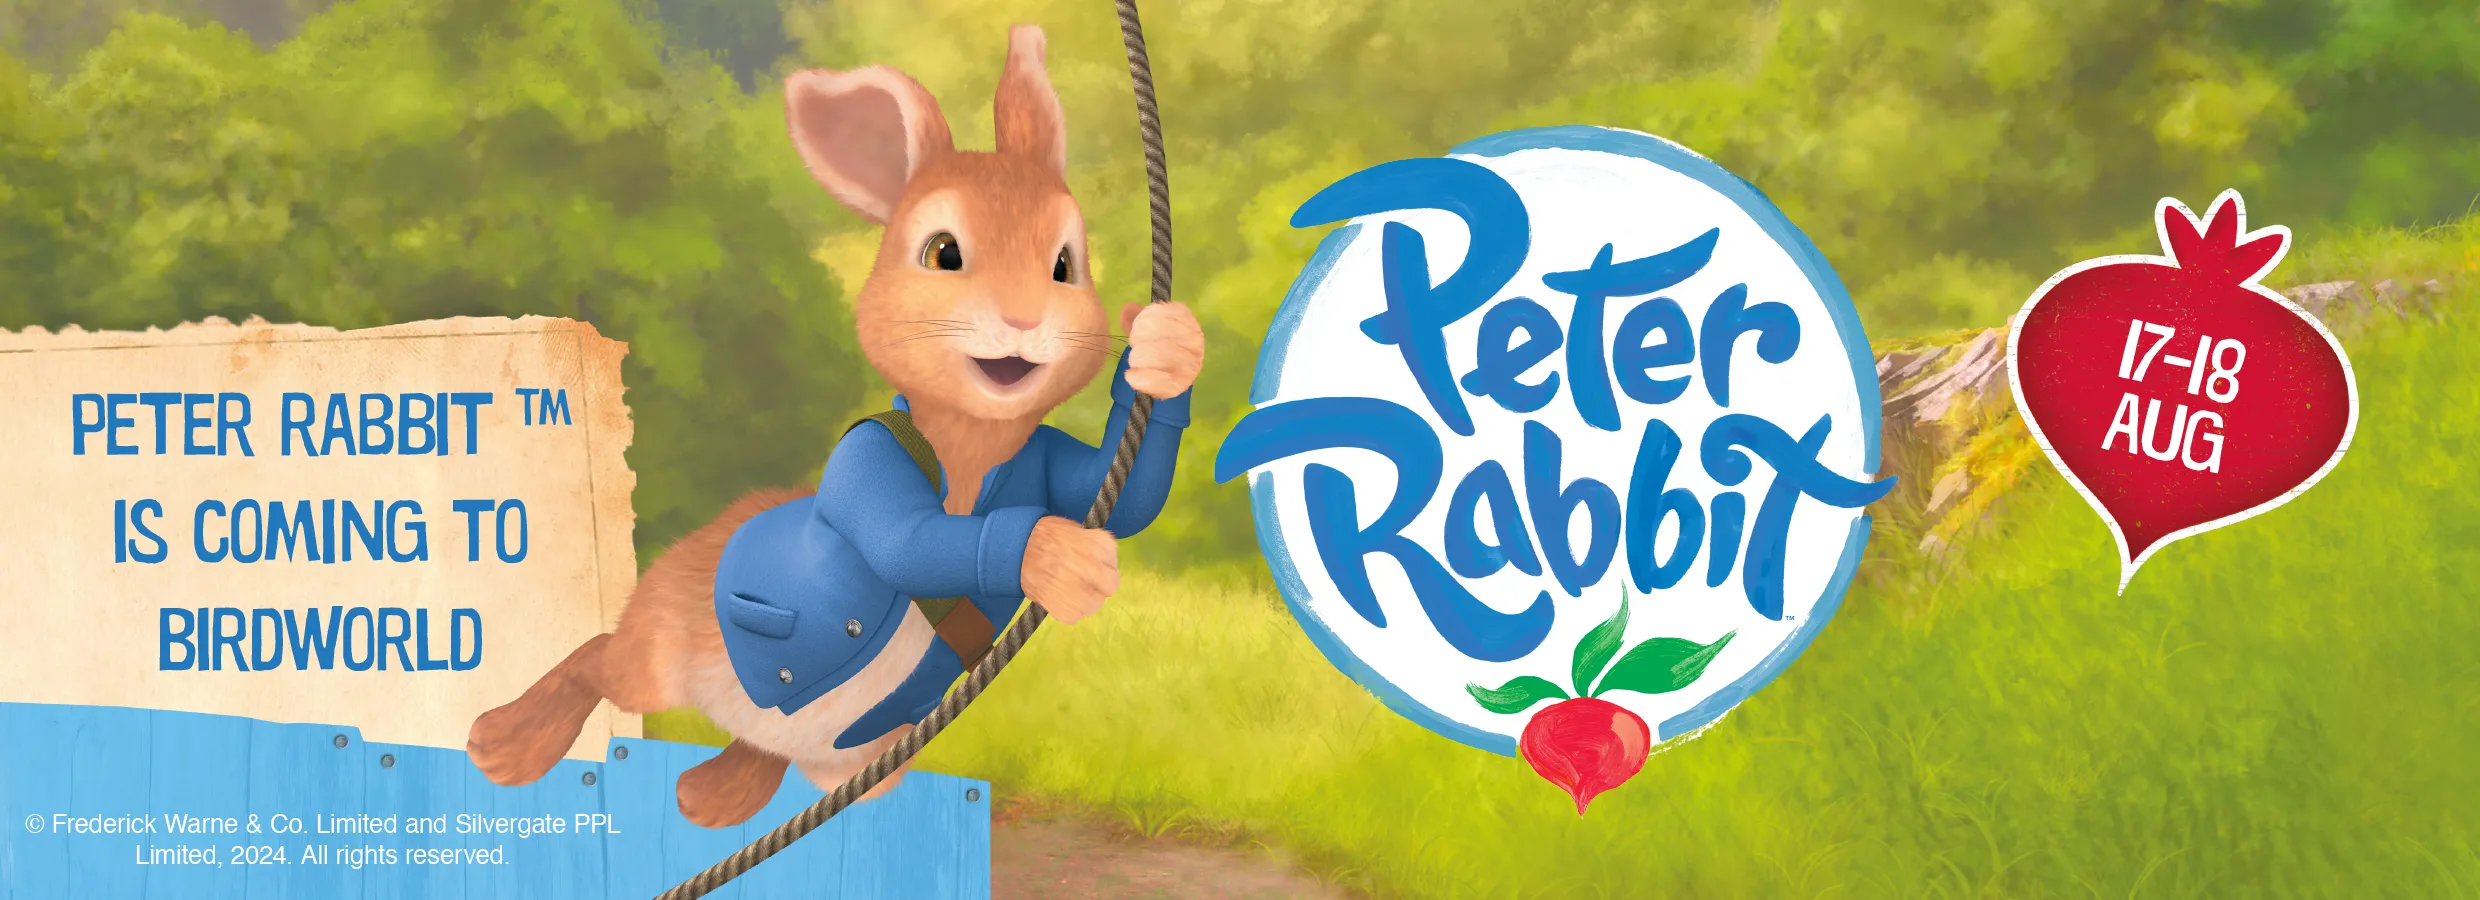 summer-events-paw-peter-rabbit